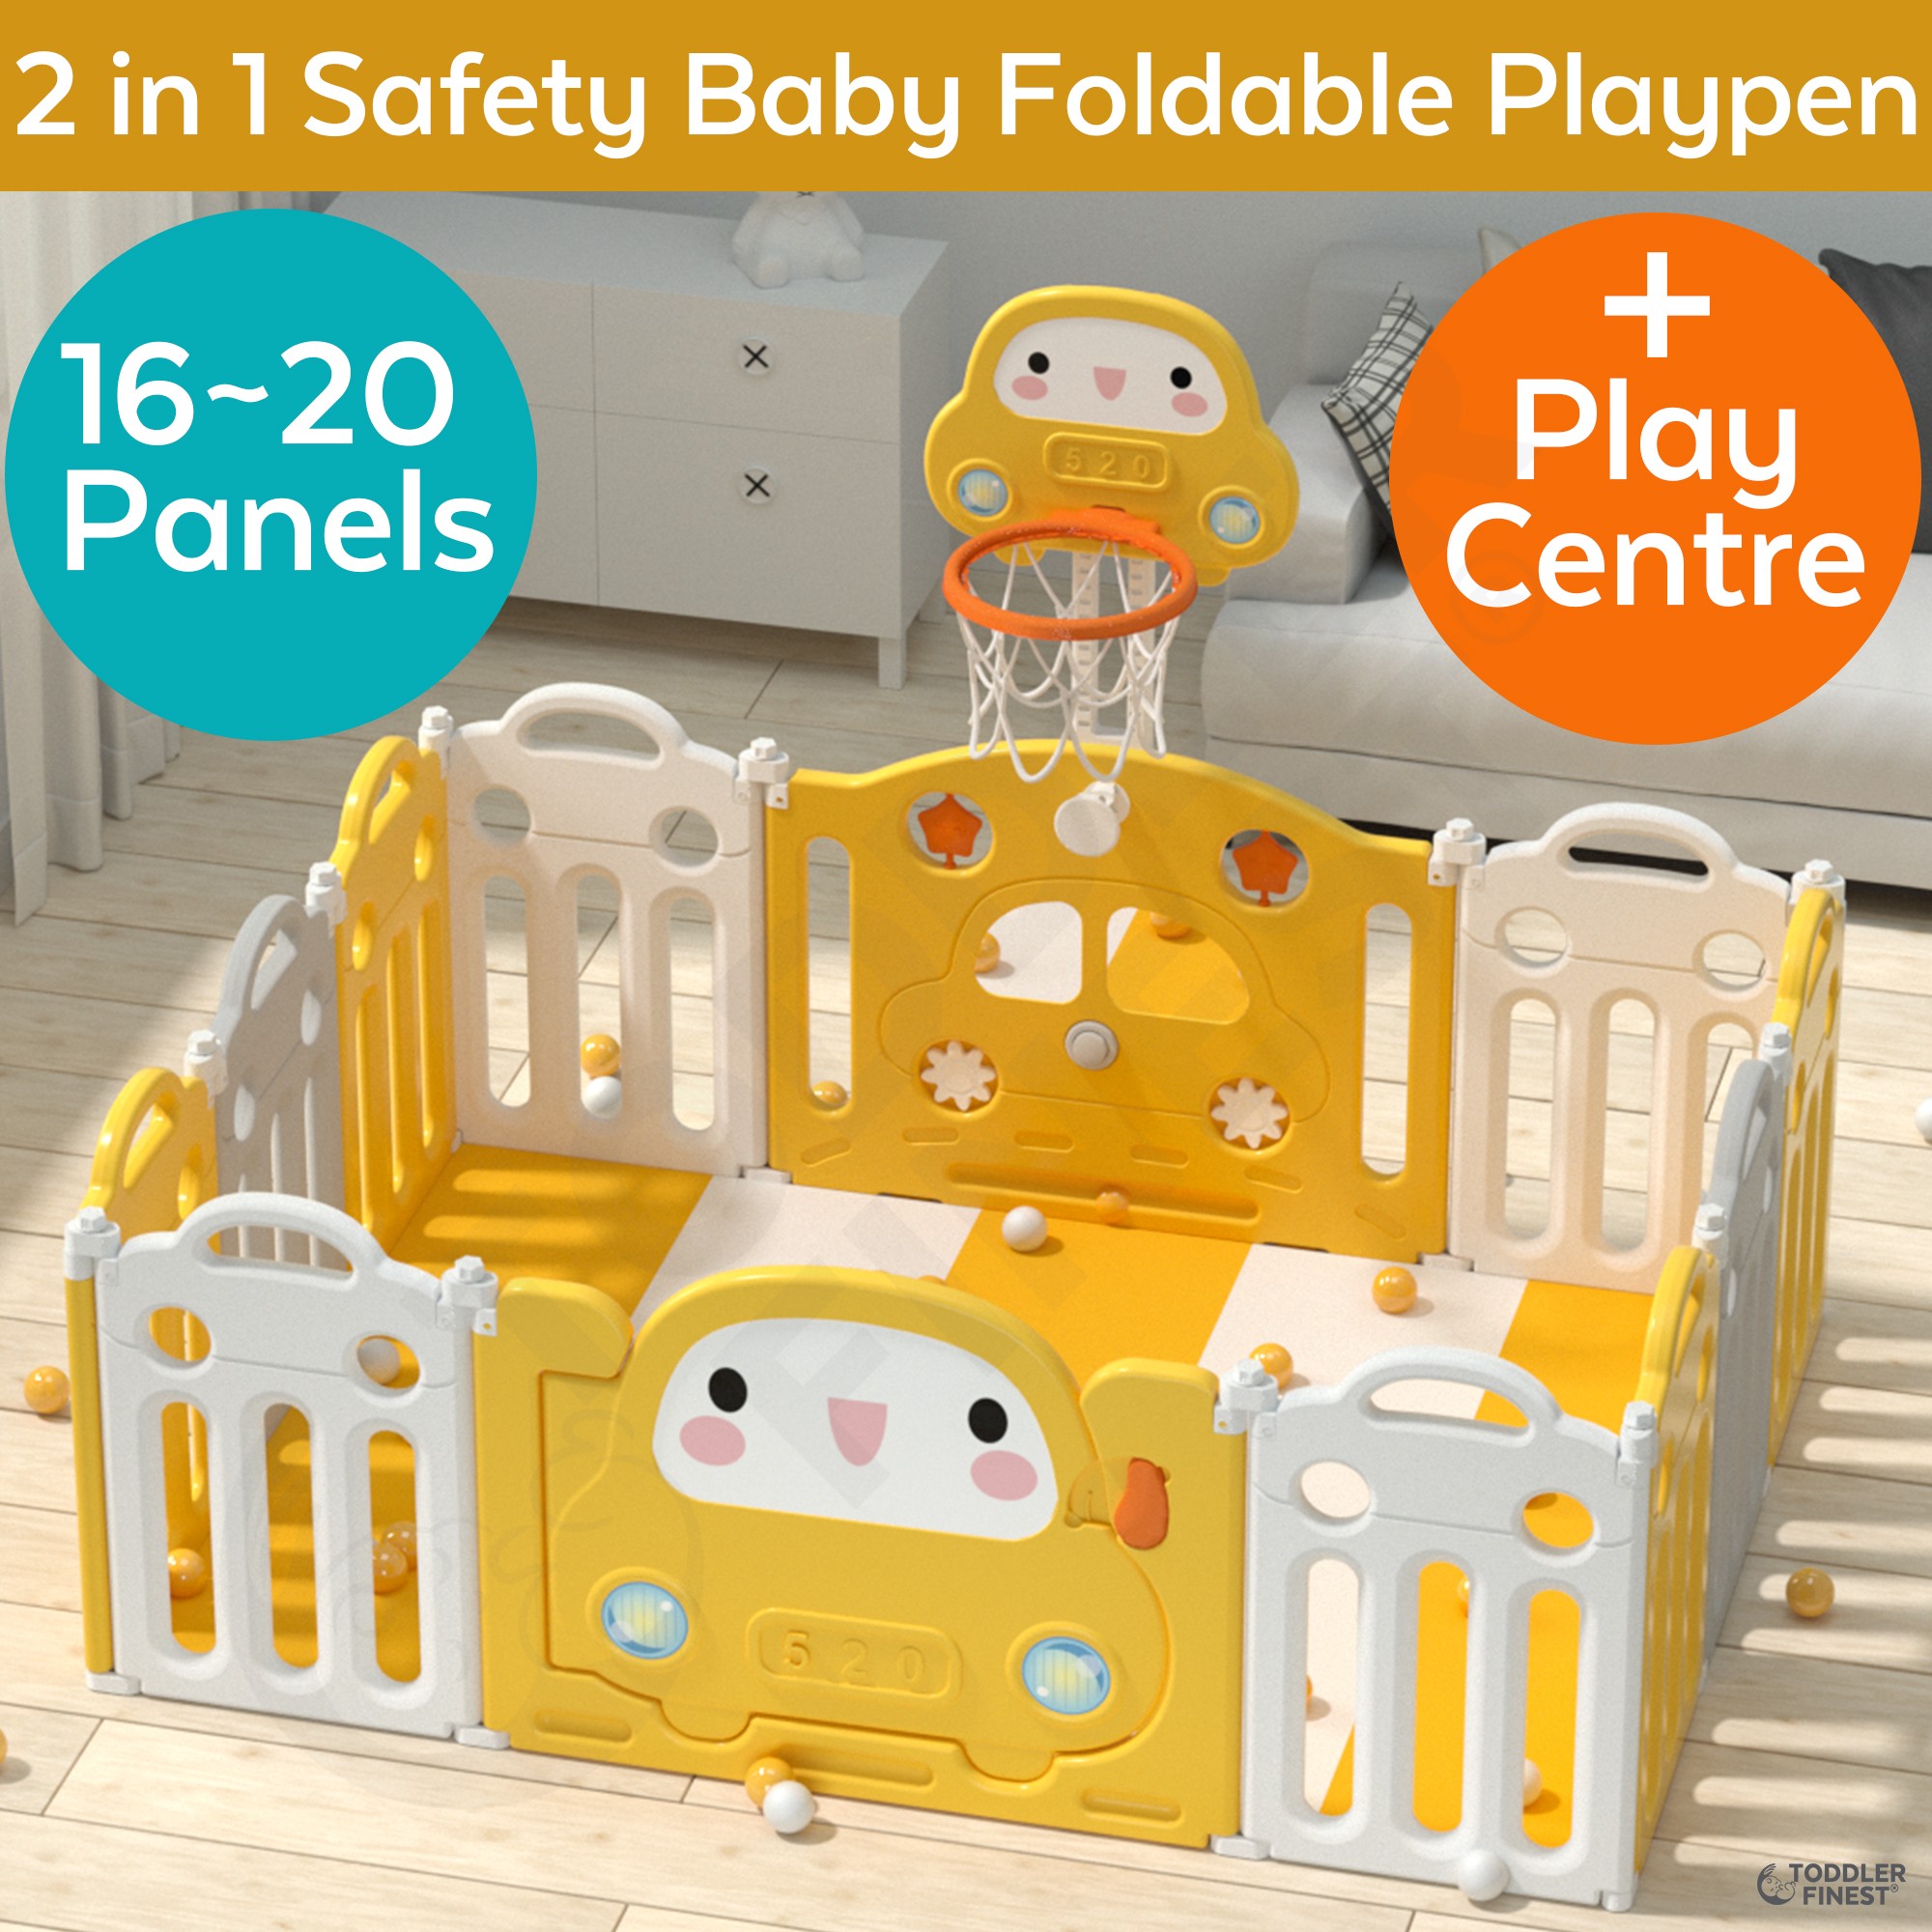 GAKINUNE Foldable Baby Playpen 10 Panel Kids Fence Safety Activity Center Area Non-Slip Rubber Bases Design for Toddler Infant Boy Girl Indoor Outdoor Use with Locking Gate Adjustable Basketball Hoop 